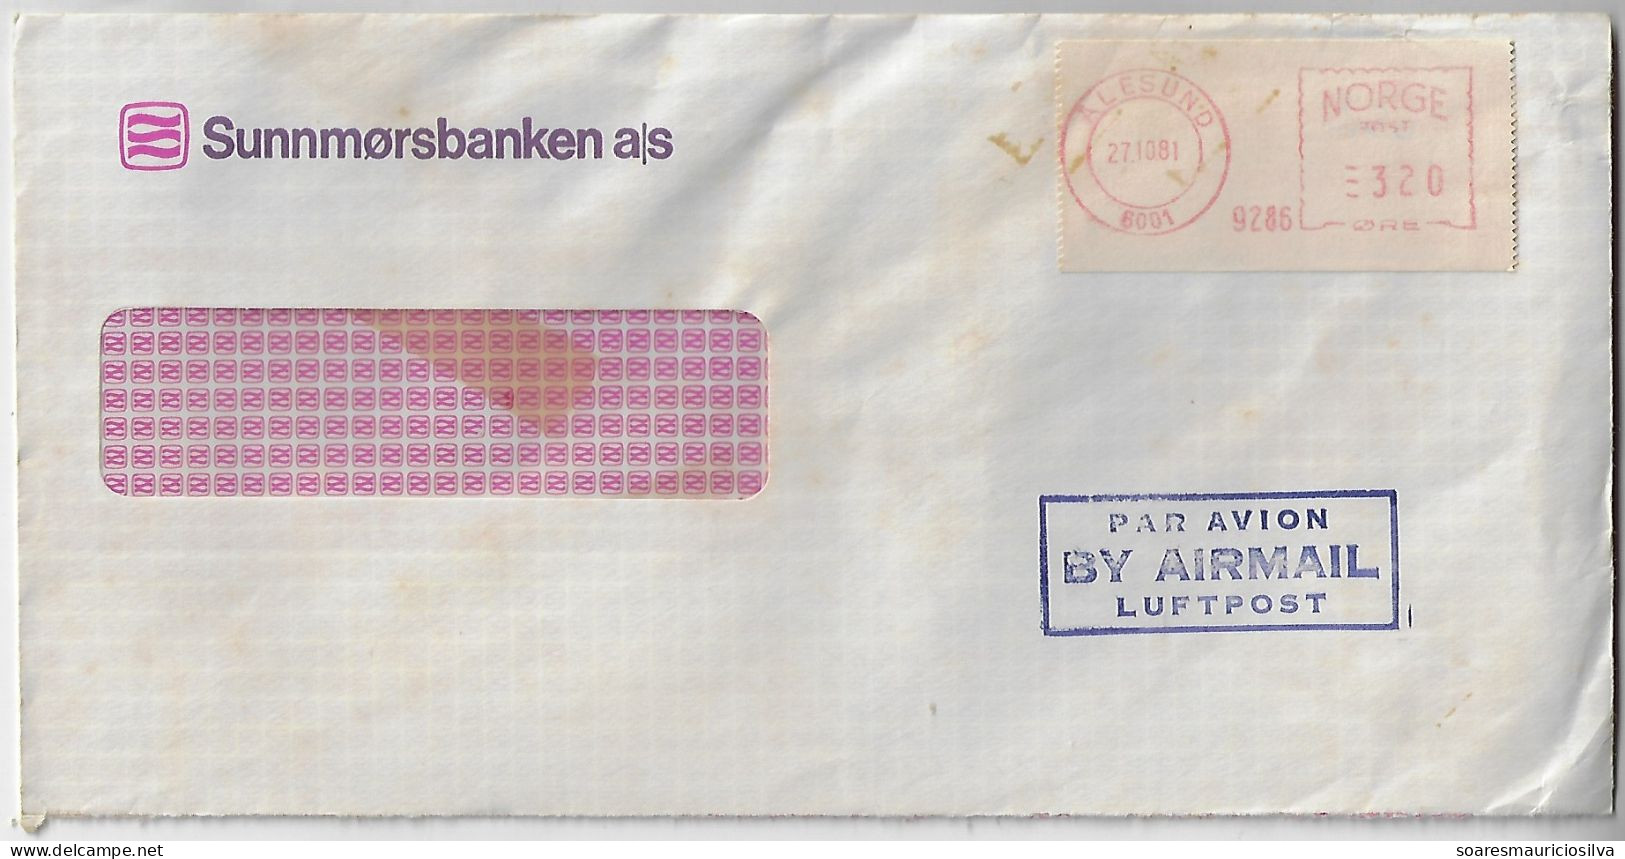 Norway 1981 Sunnmørsbanken airmail Cover Sent From Alesund Meter Stamp Pitney Bowes "5000" - Covers & Documents